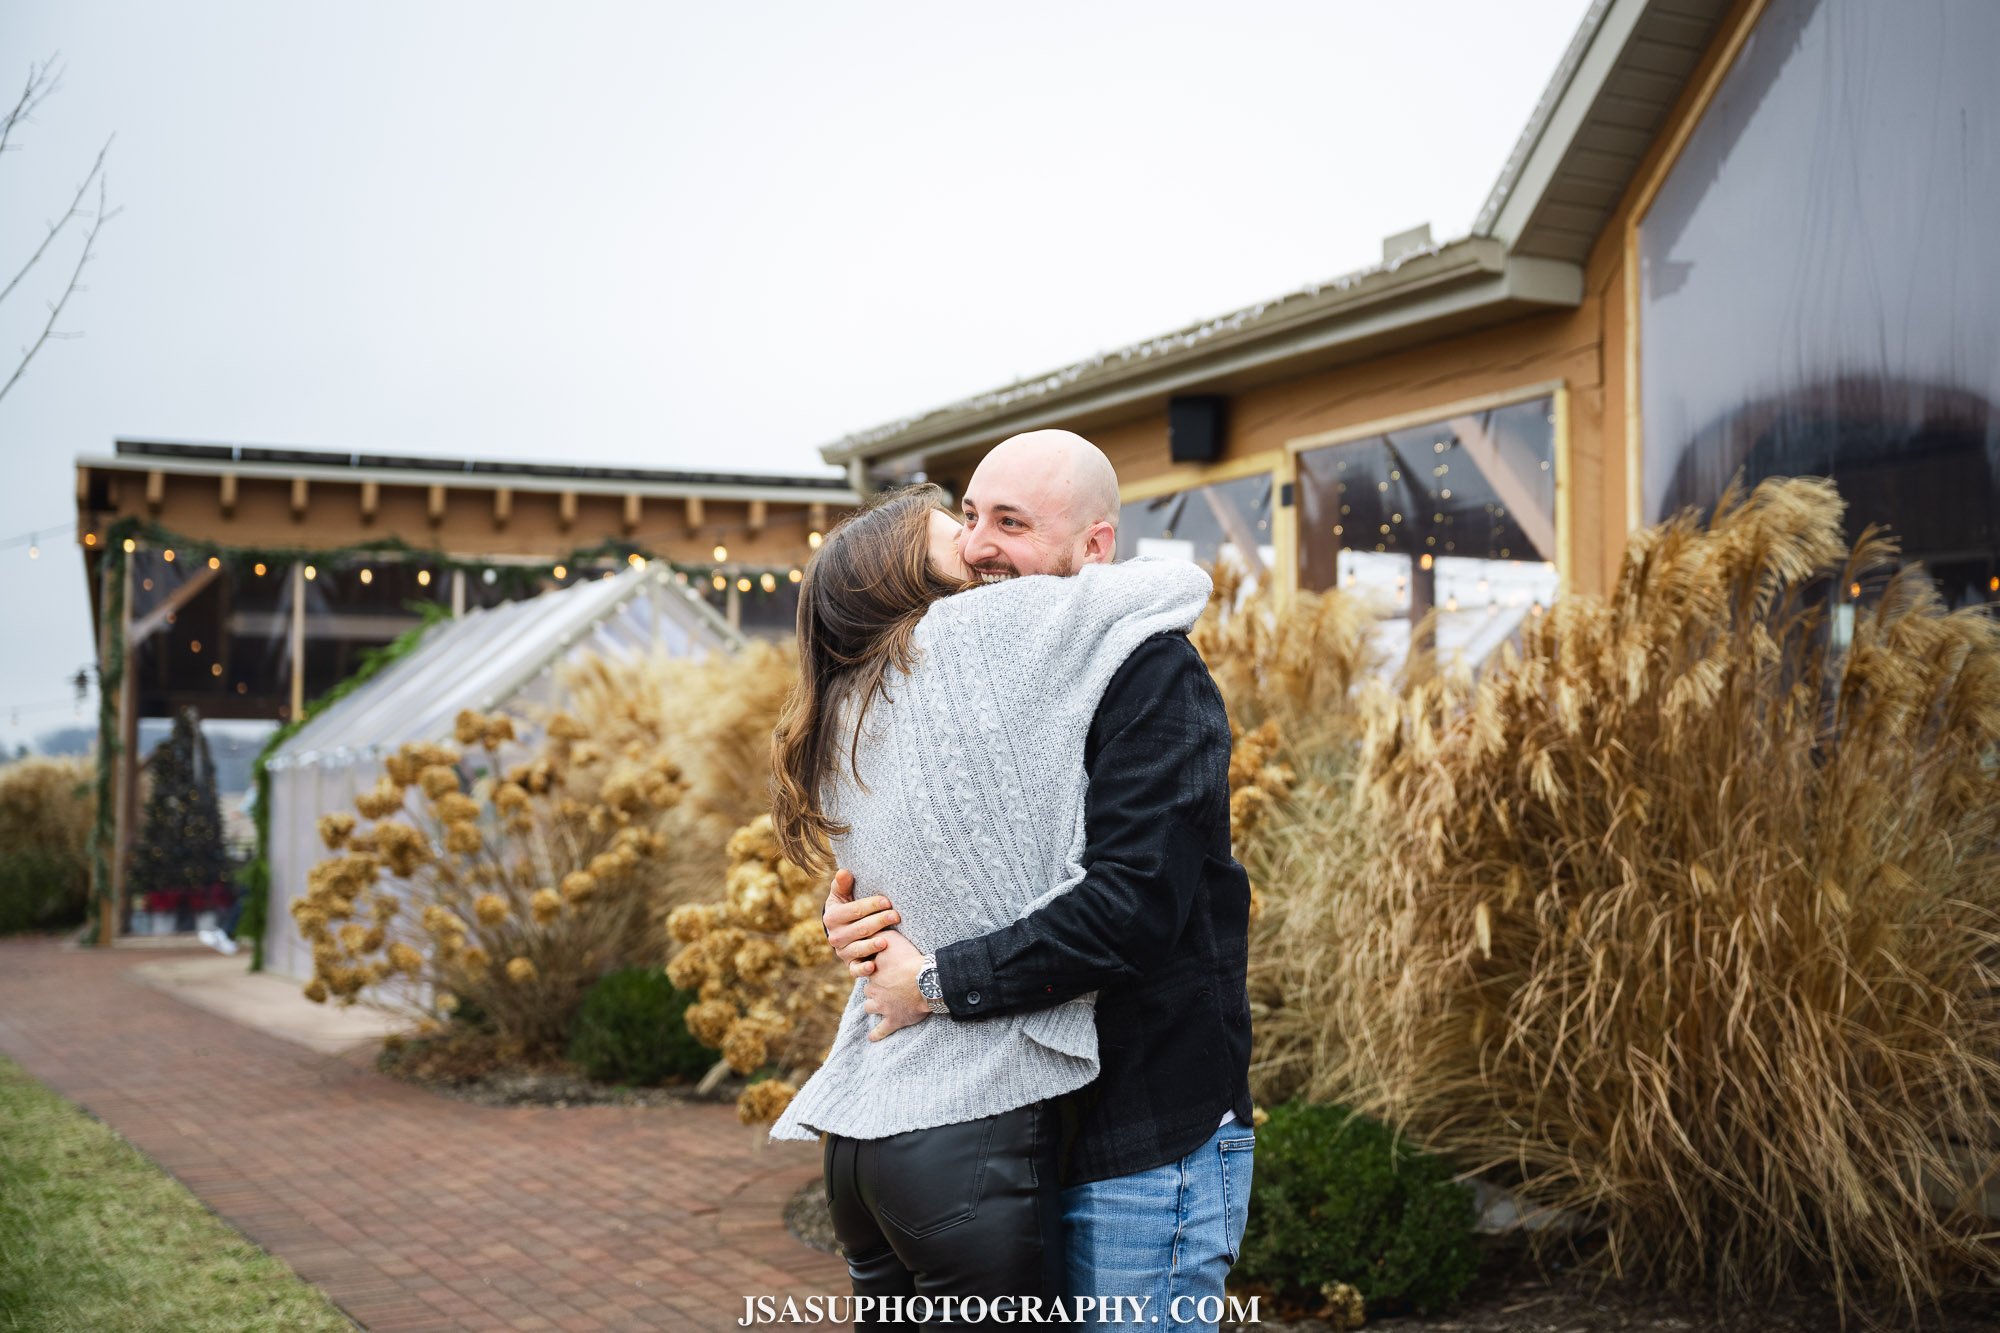 drew-alex-surprise-proposal-photos-old-westminister-winery-jsasuphotography-8.jpg